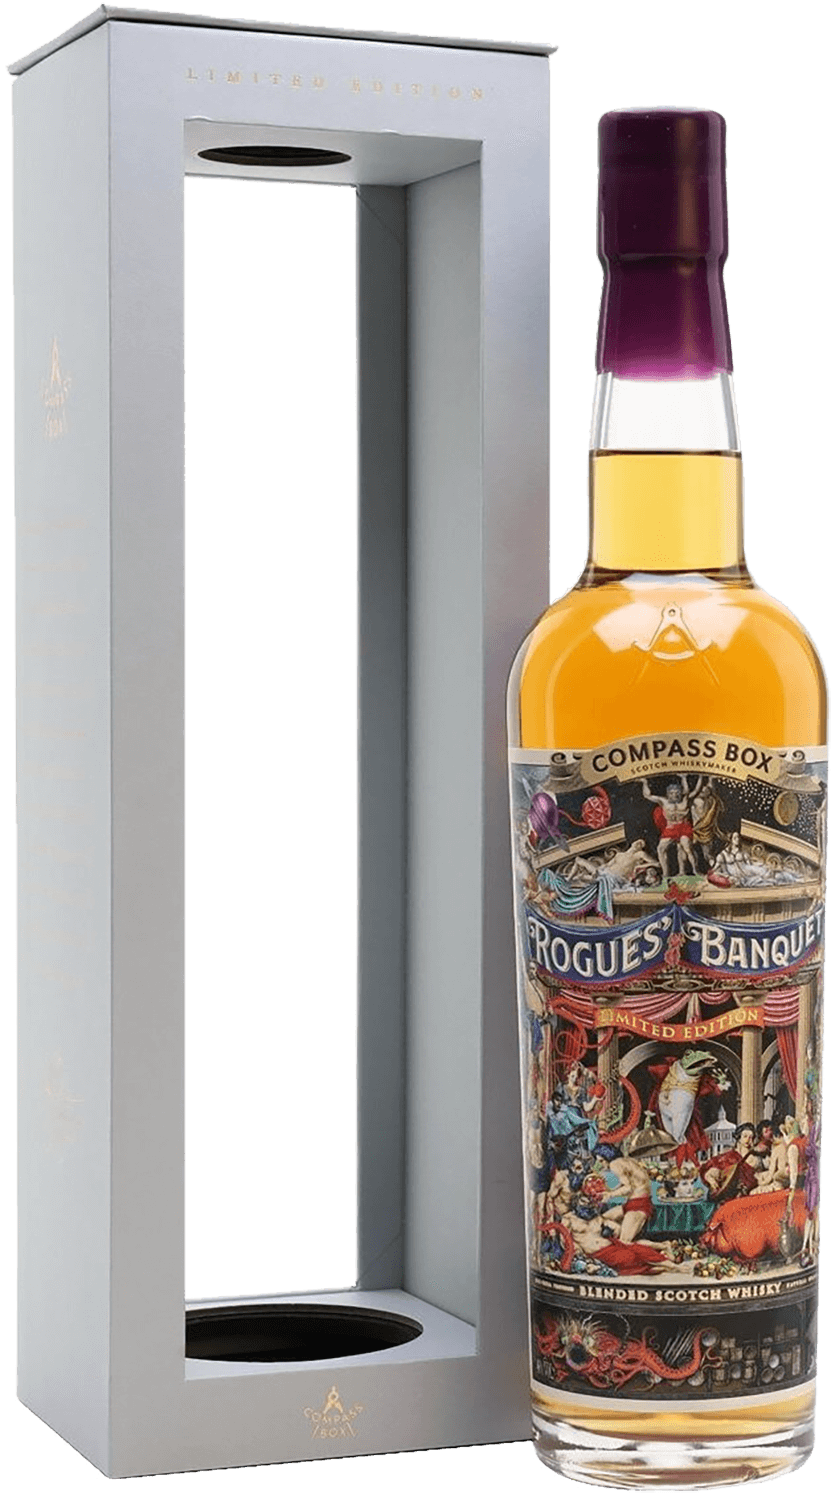 Compass Box Rogues' Banquet Blended Scotch Whisky (gift box) compass box juveniles blended malt scotch whisky